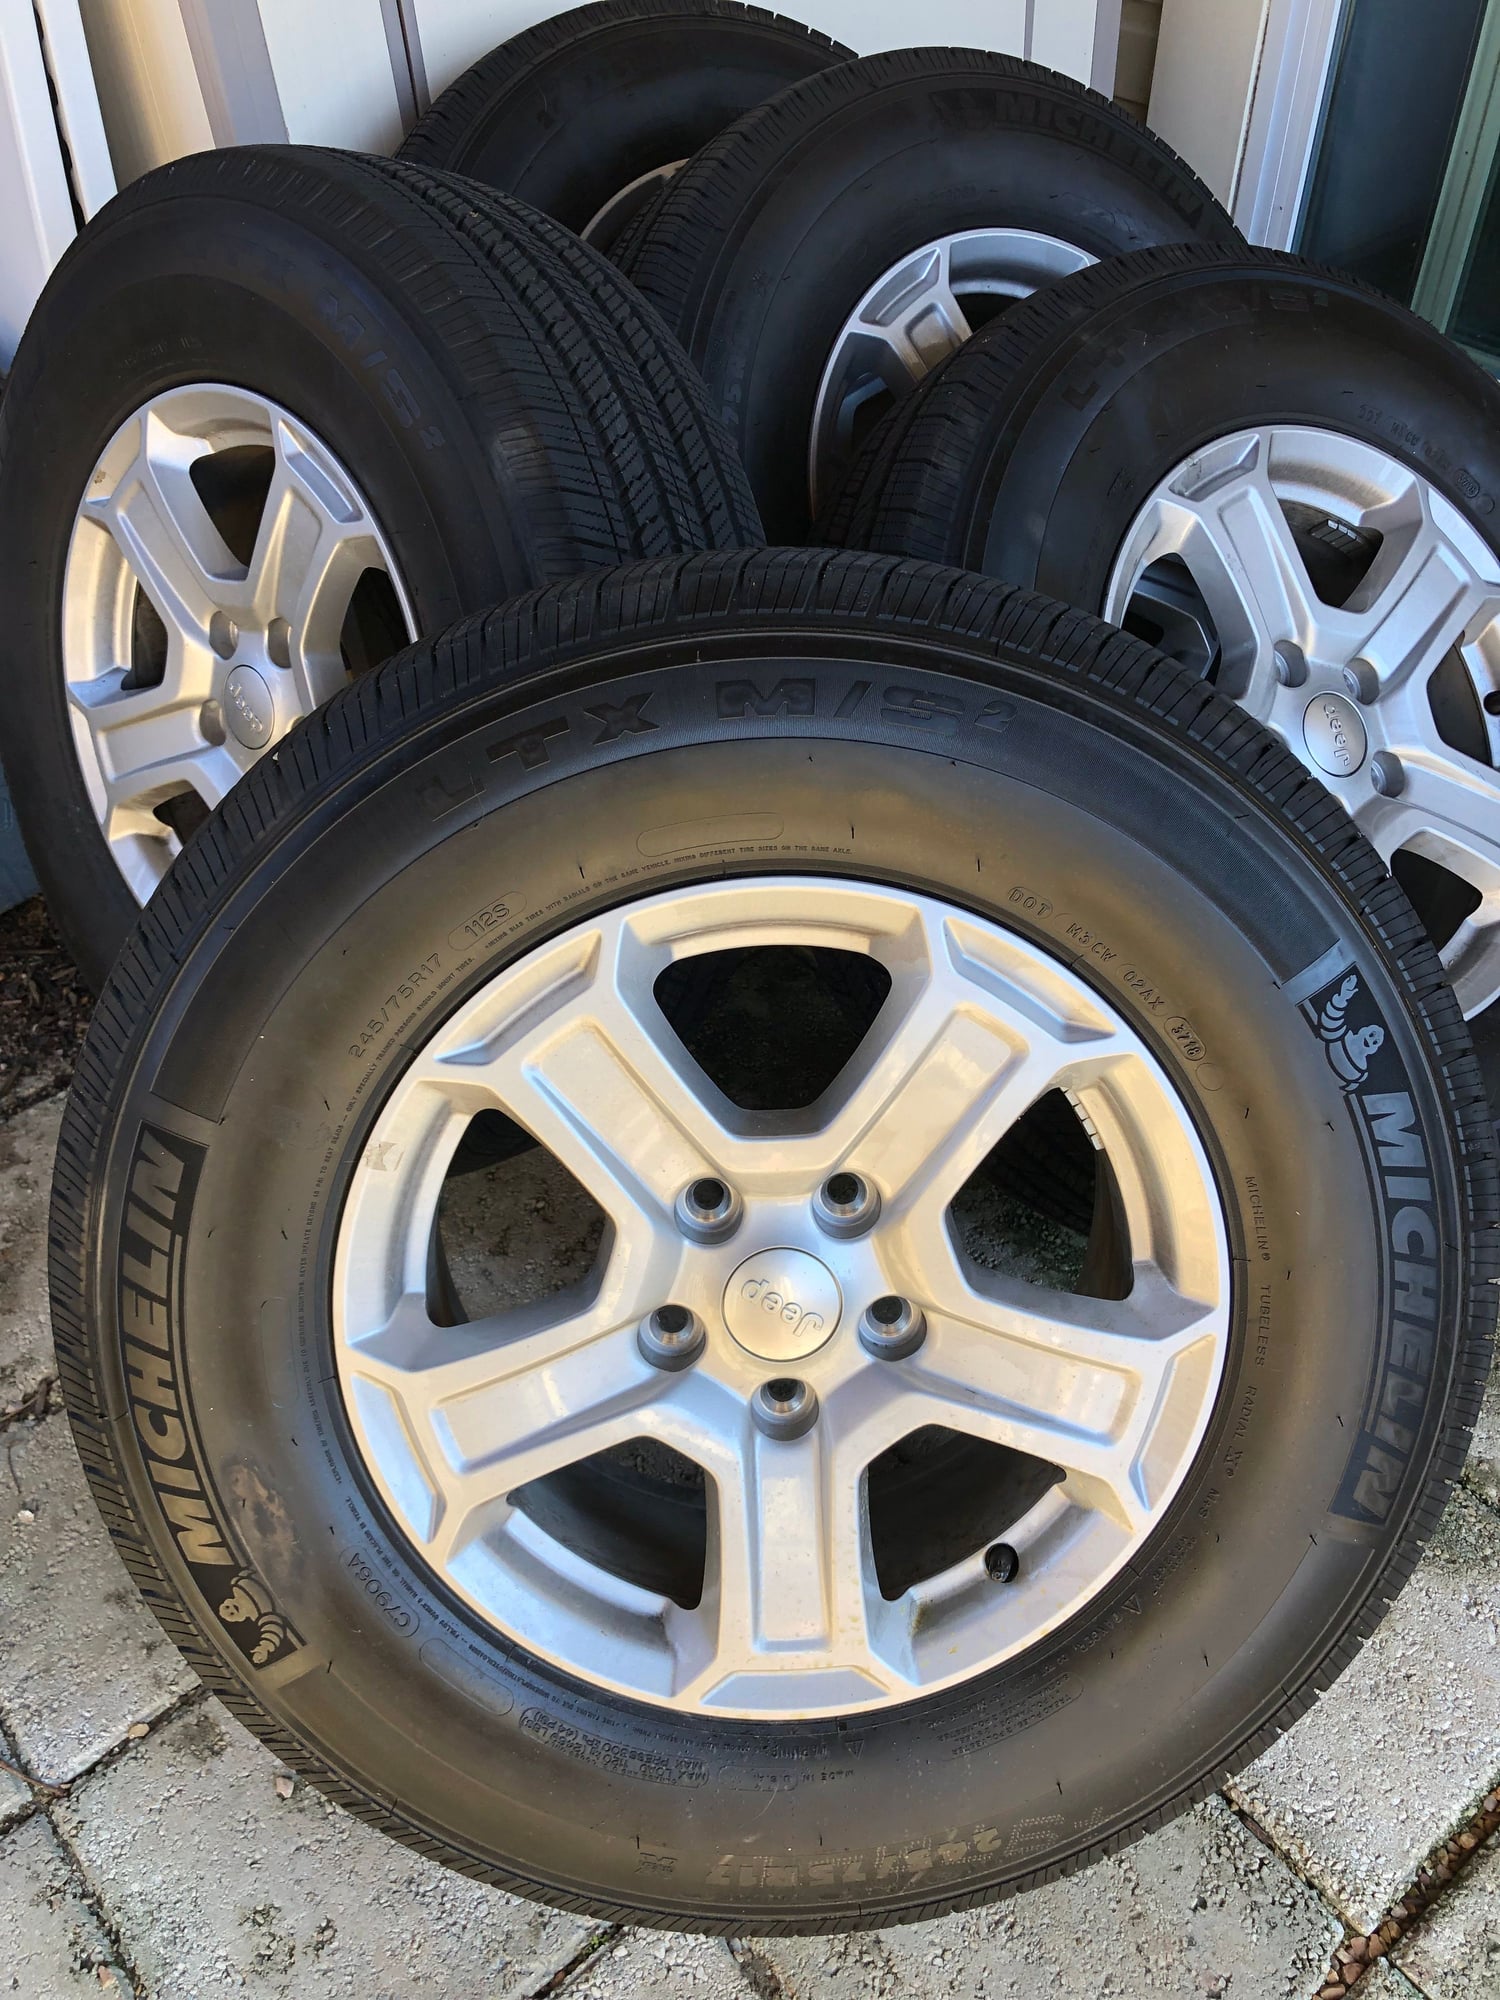 Wheels and Tires/Axles - $450 (5) 2018 Sport S Takeoffs, Tires/Wheels/Lugs/TPMS - Used - All Years Any Make All Models - Alexandria, VA 22315, United States